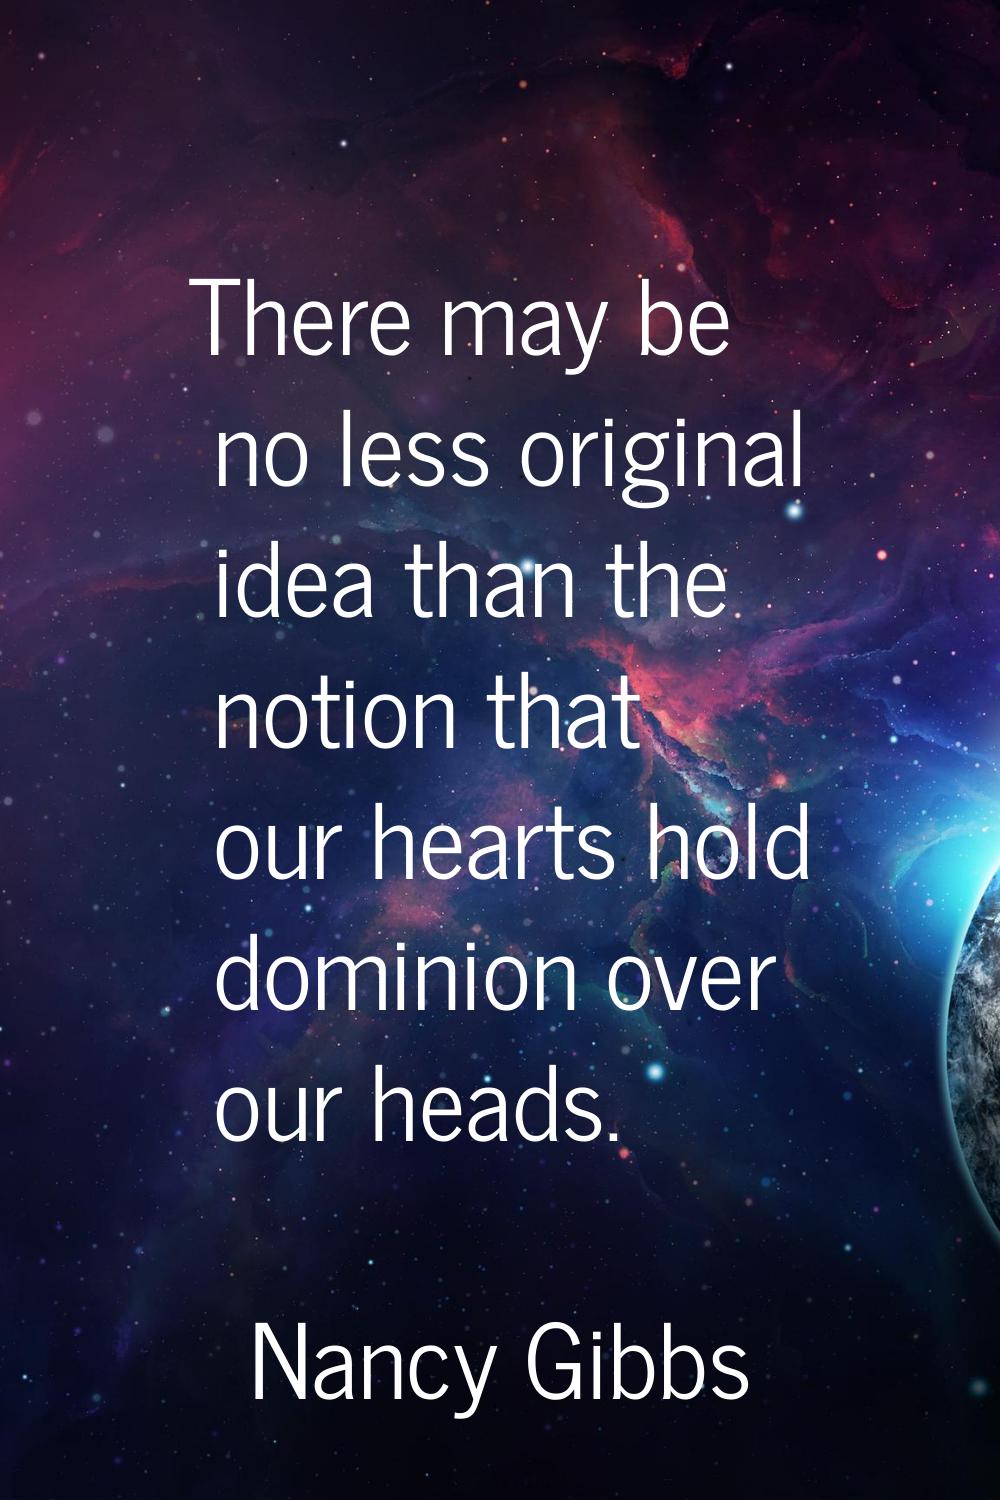 There may be no less original idea than the notion that our hearts hold dominion over our heads.